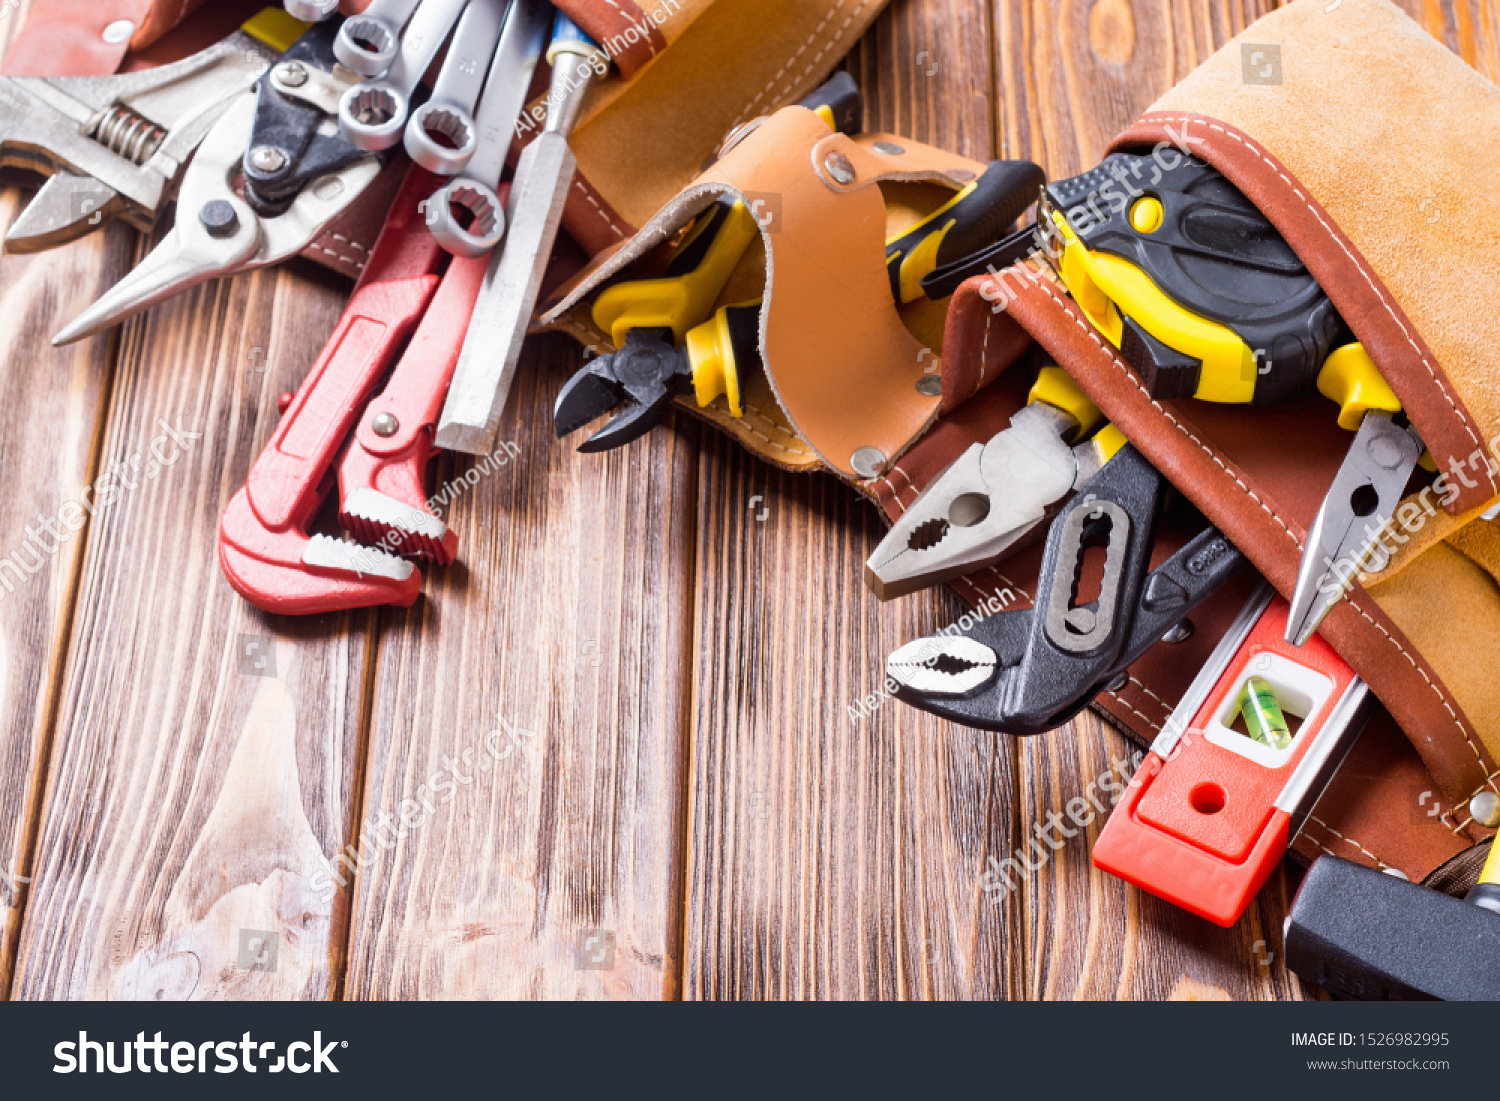 Tool belt with hand tools . Work background on wooden board #1526982995